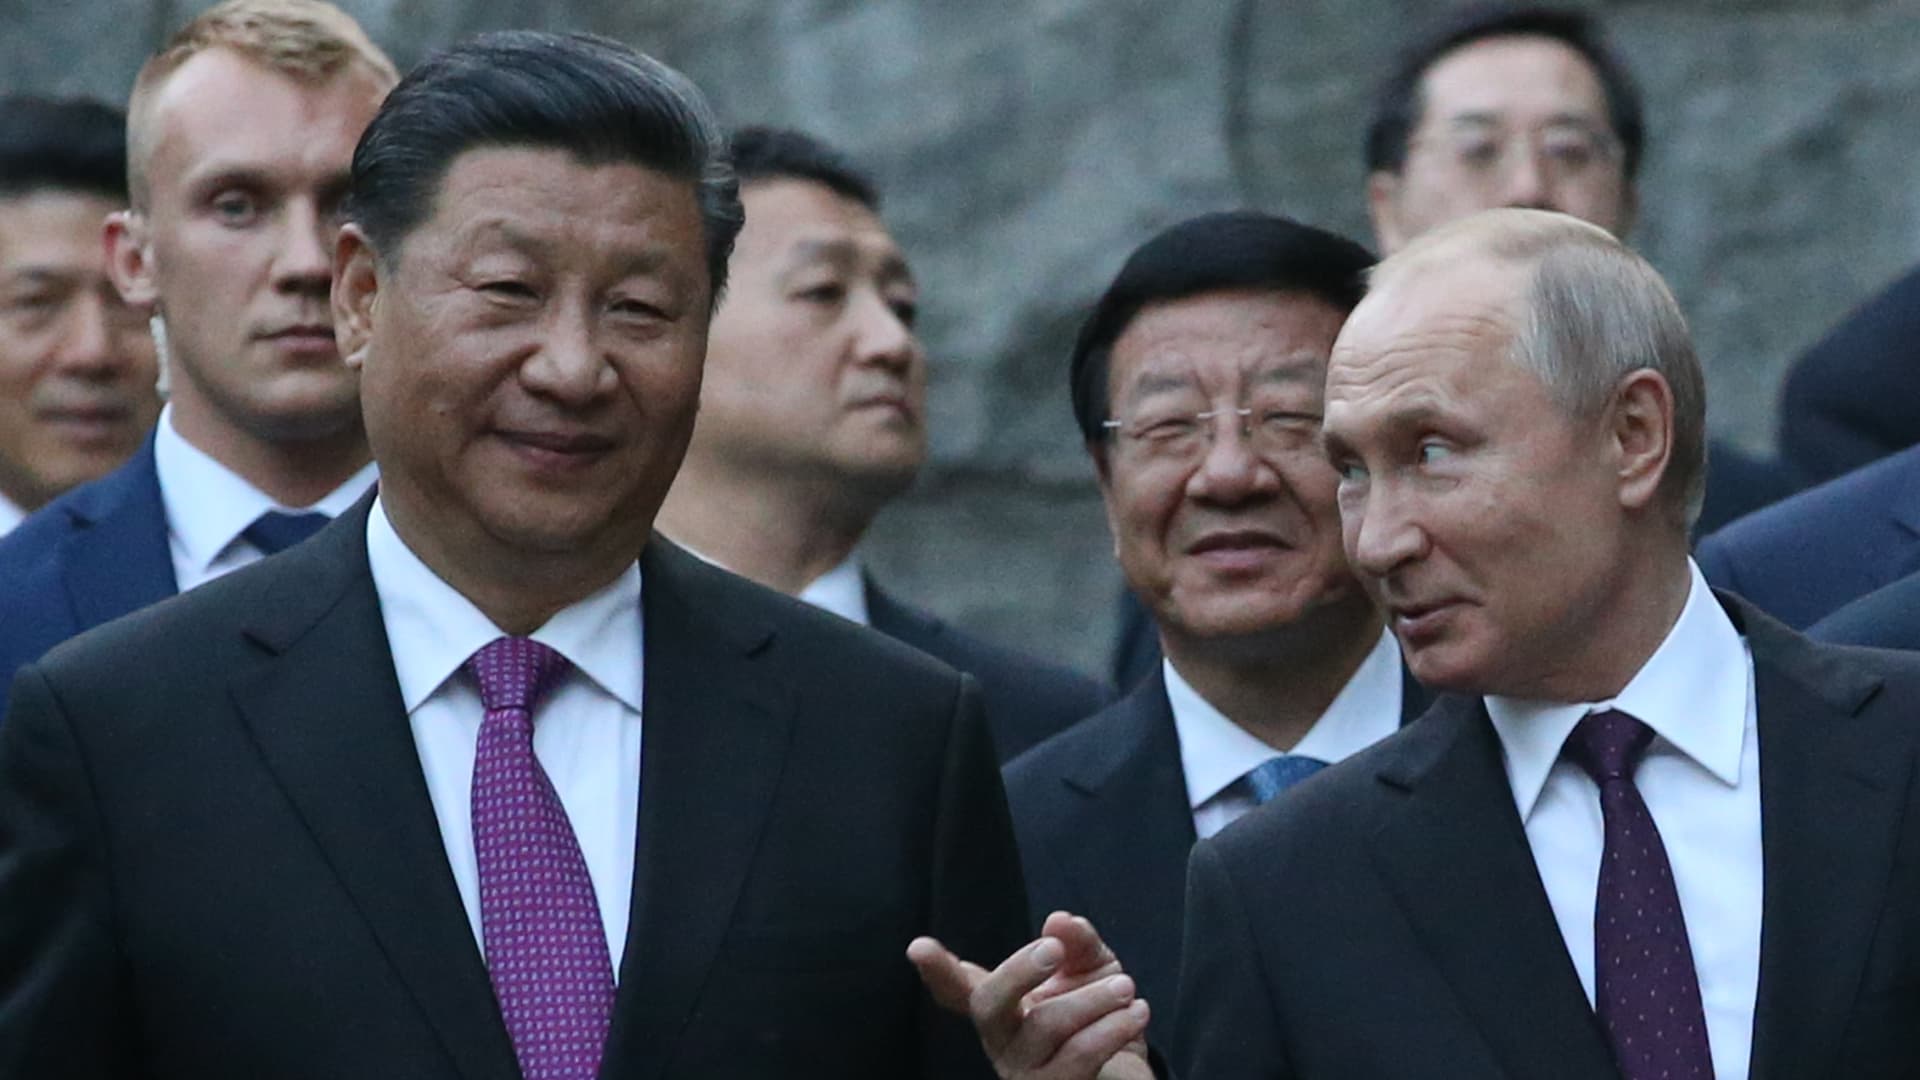 Russian President Vladimir Putin with Chinese President Xi Jinping while visiting the Moscow Zoo in Russia on June 5, 2019. Xi is now on a three-day state visit to Russia.